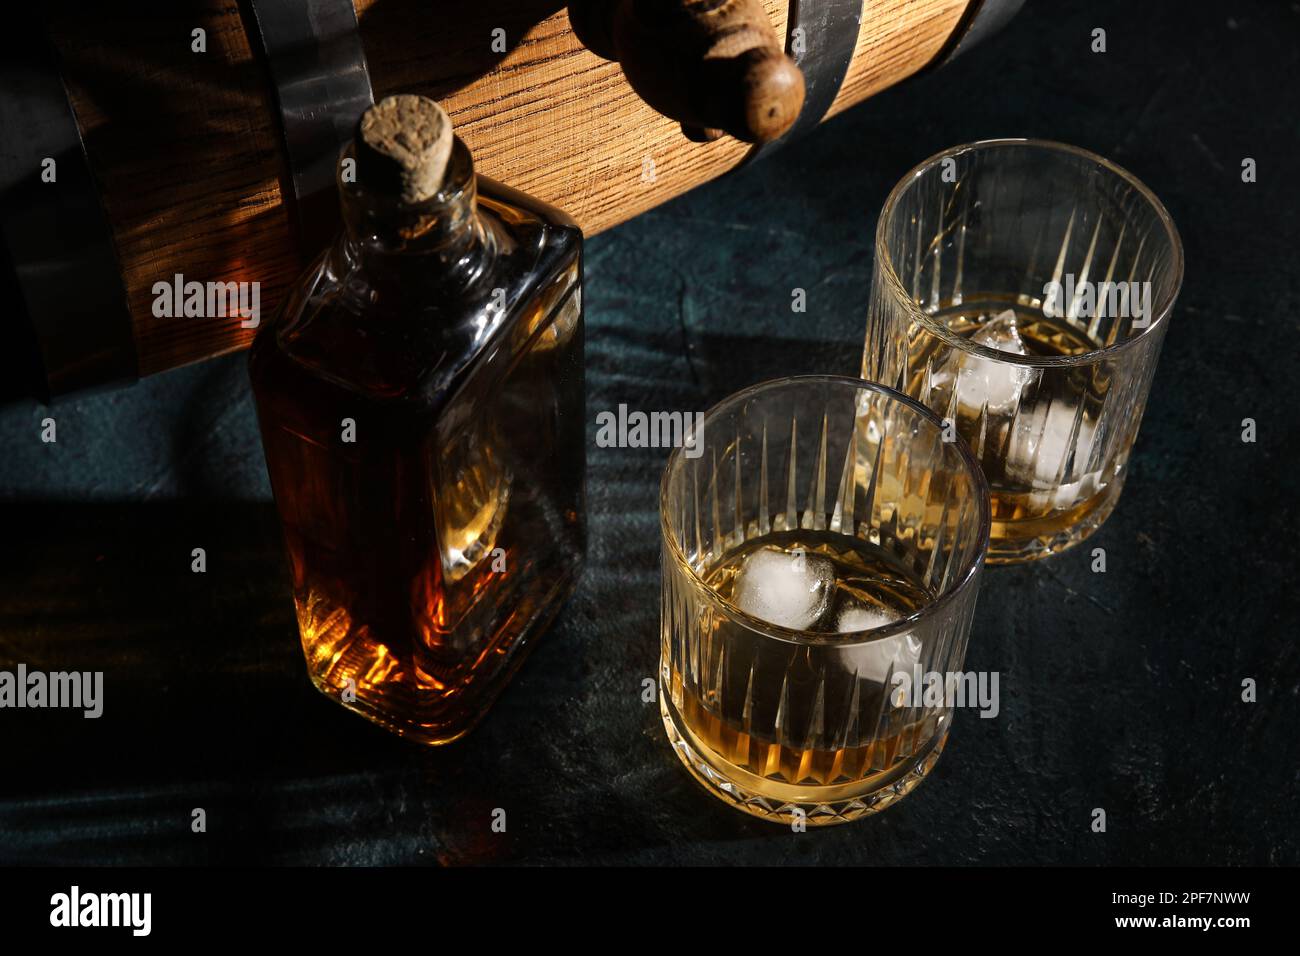 Glasses and bottle of cold whiskey on dark background Stock Photo